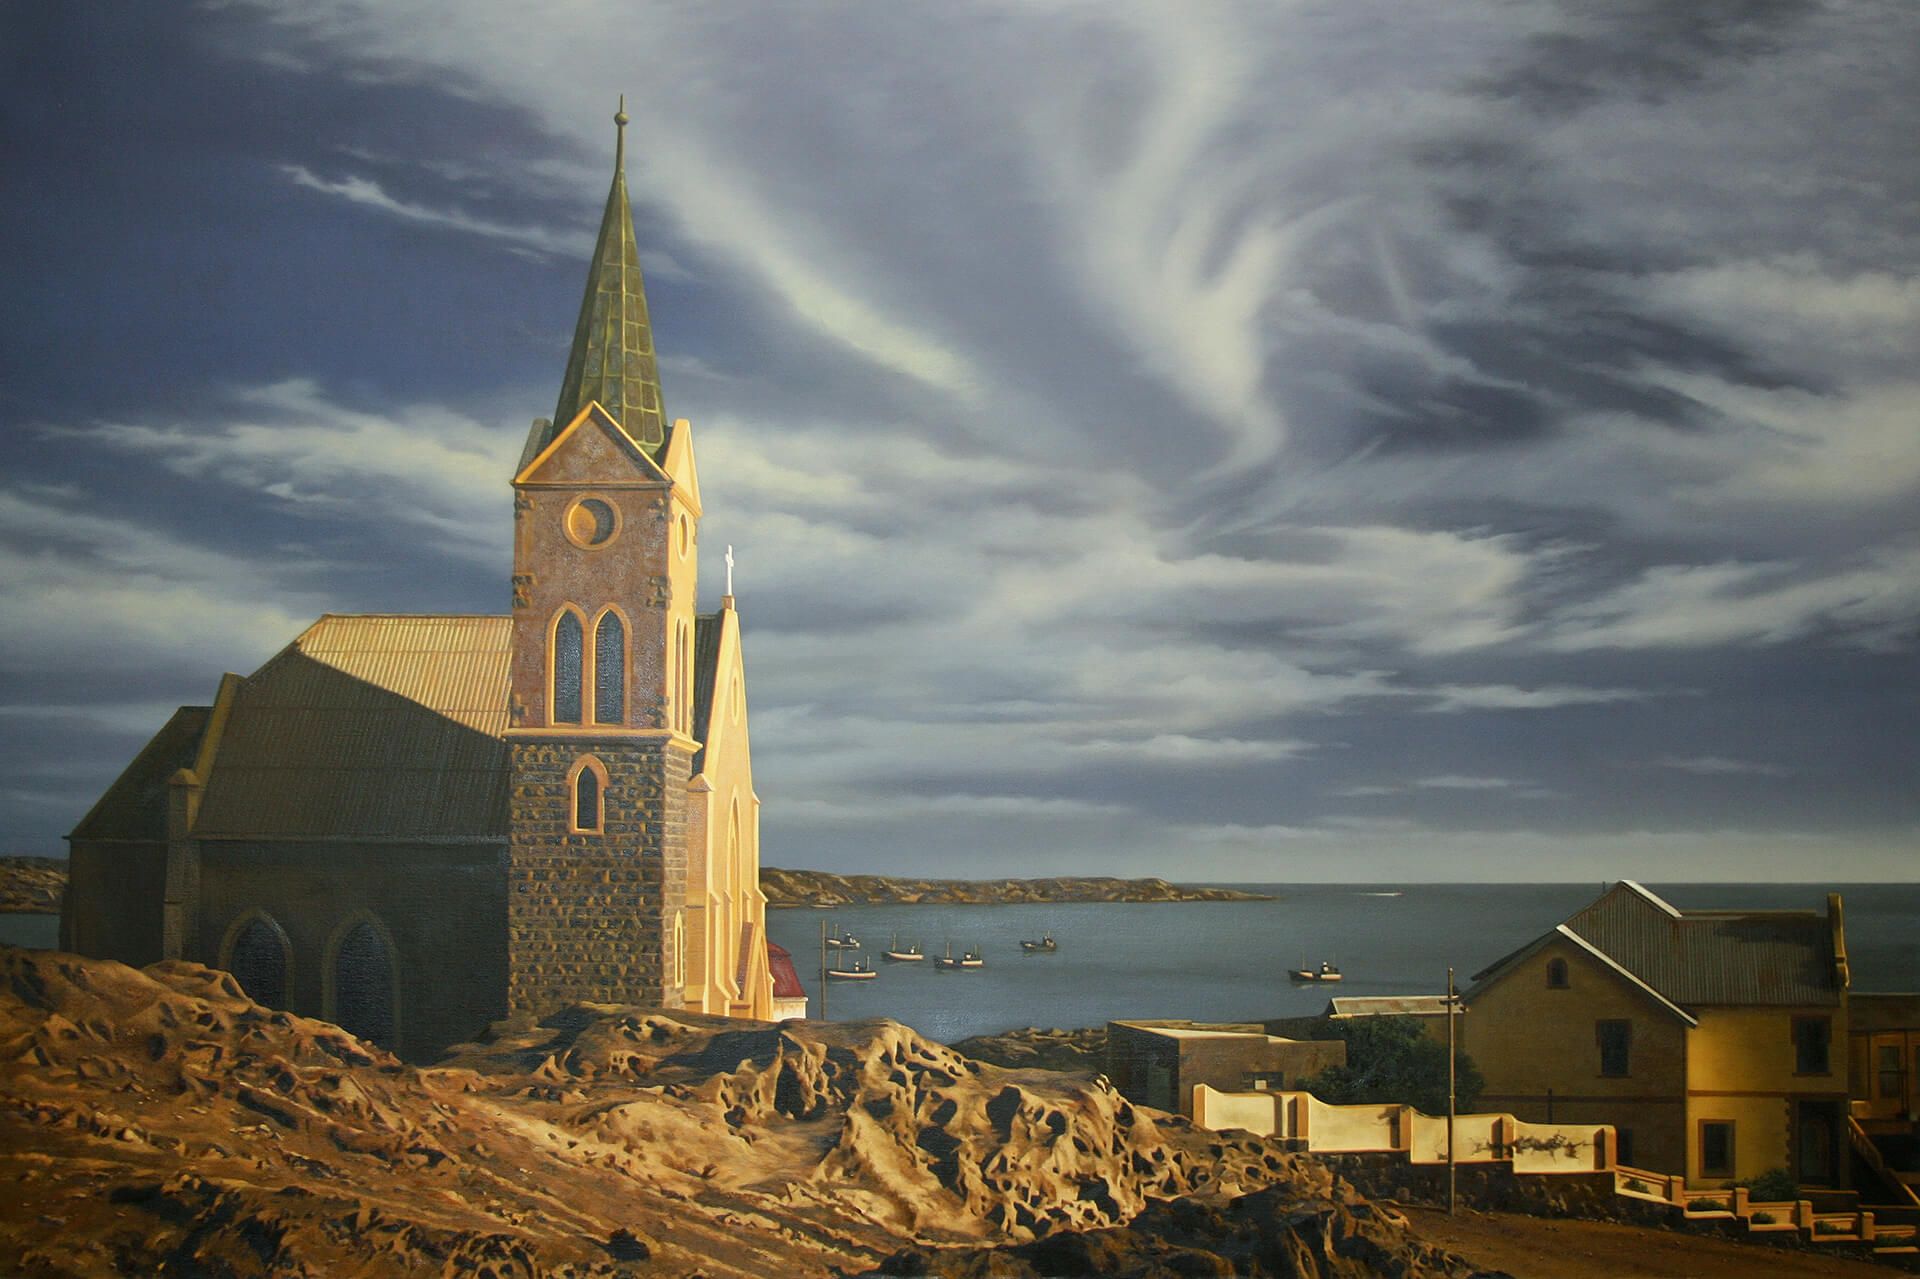 Photorealistic painting of a church overlooking a bay